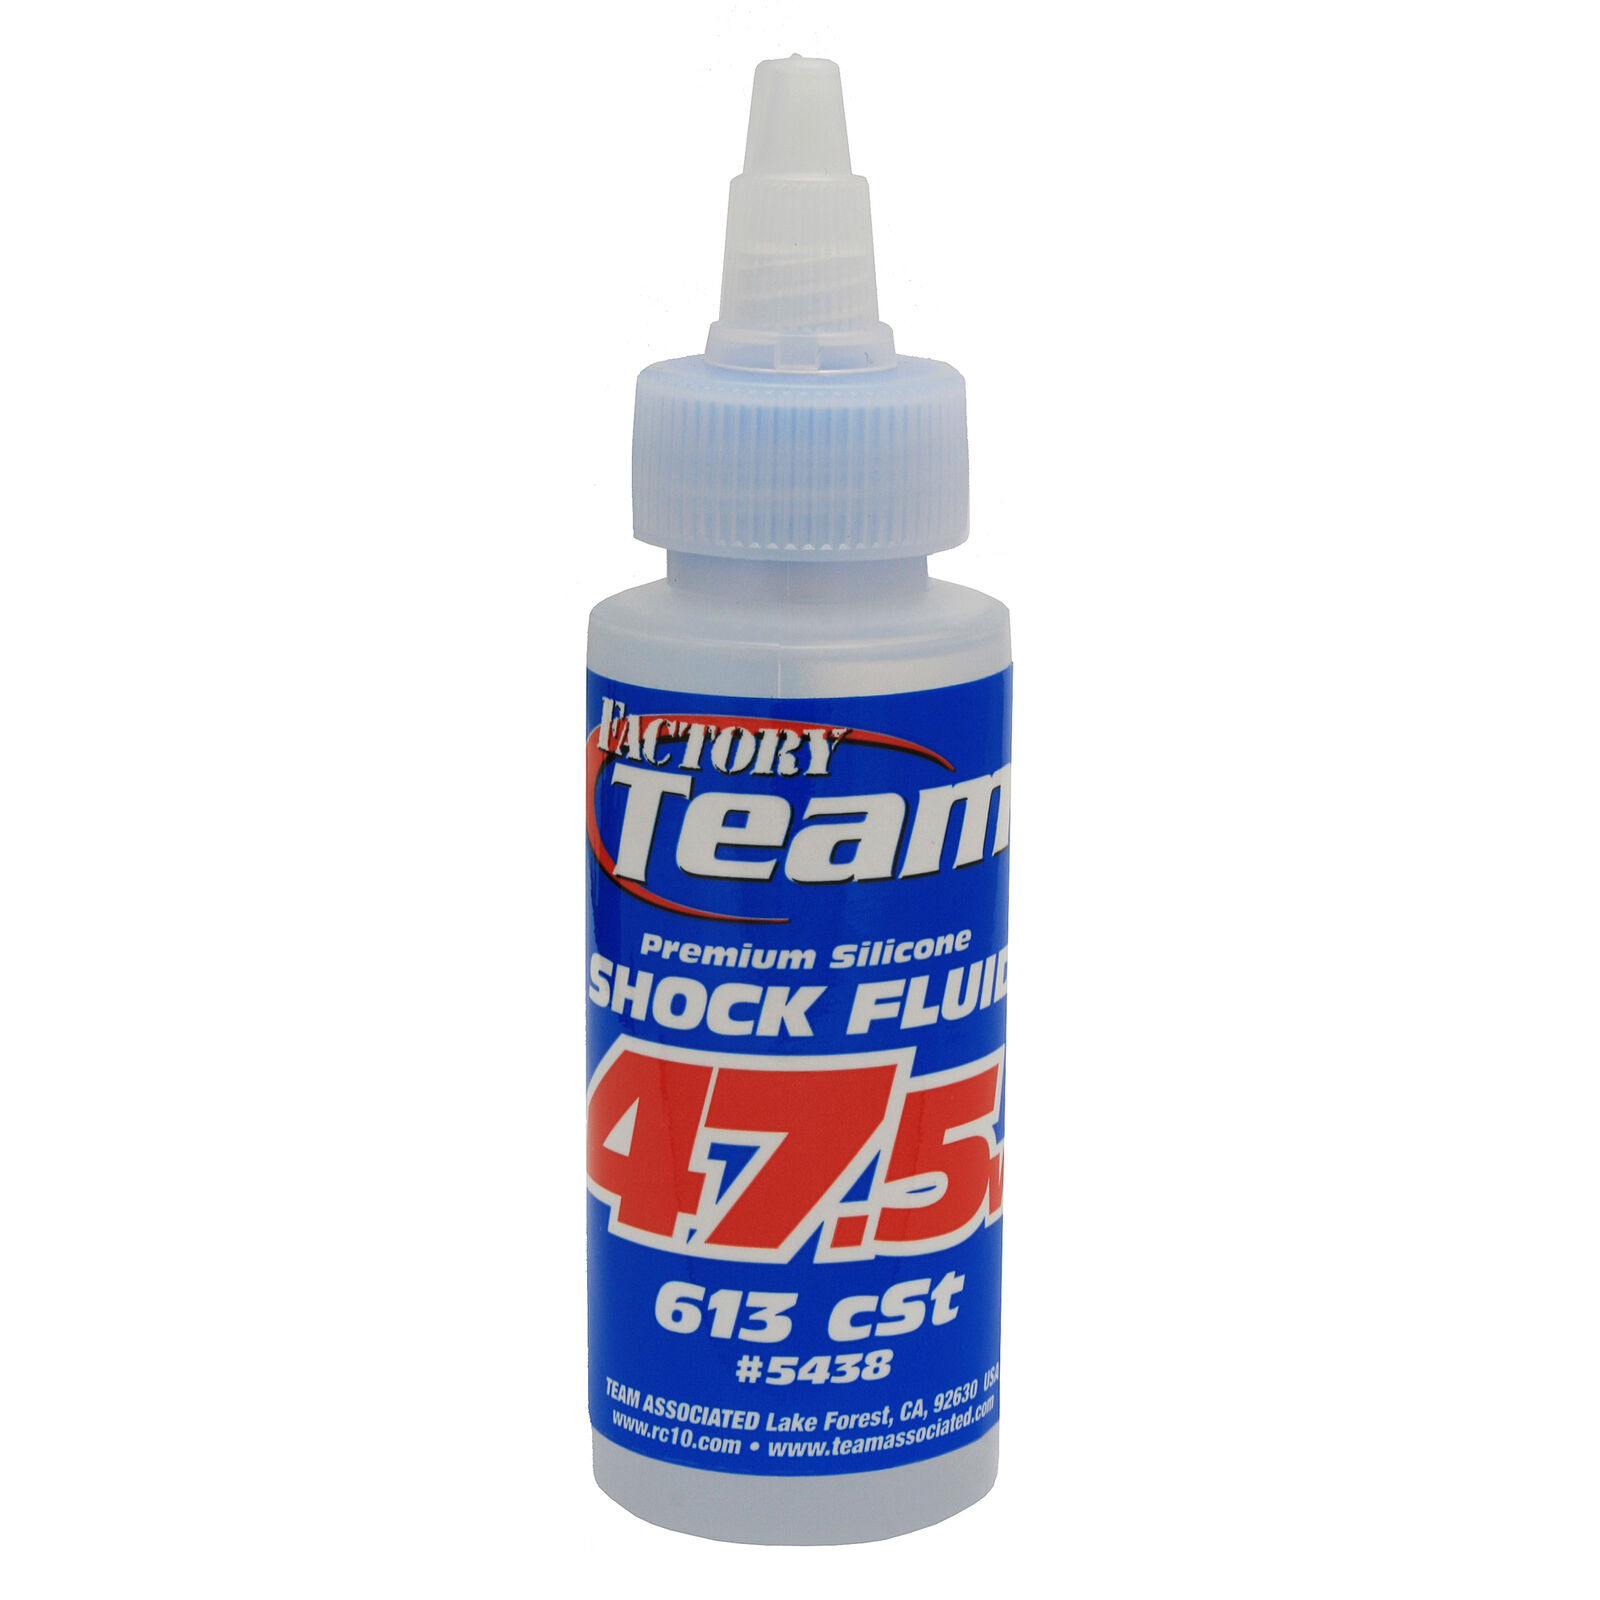 Factory Team Silicone Shock Fluid, 47.5Wt (613 cSt)